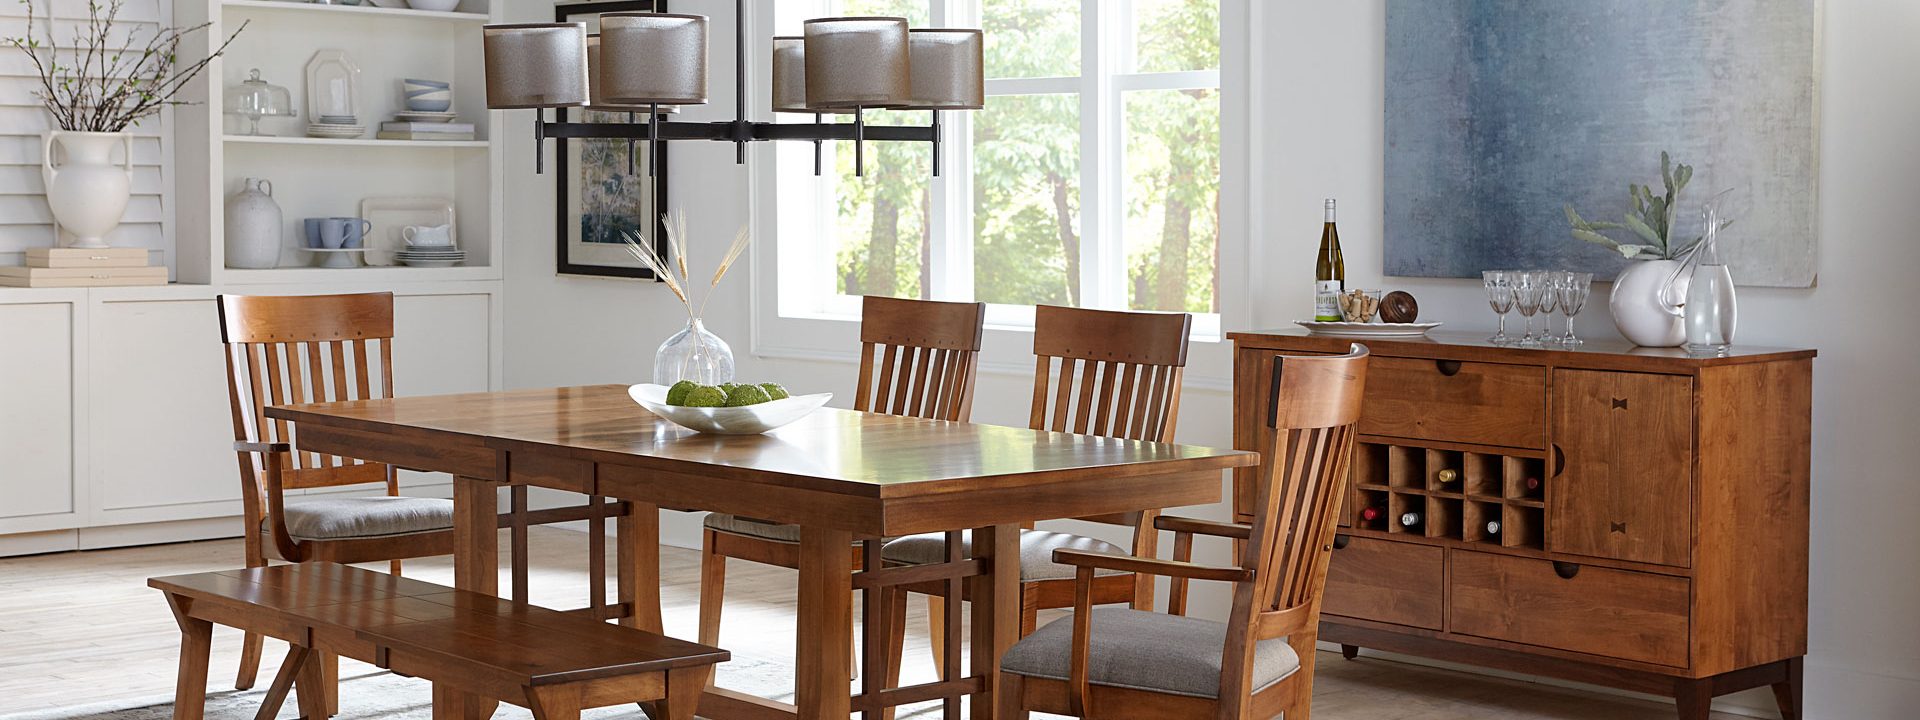 simplicity hardwood dining room furniture kountry cabinets store